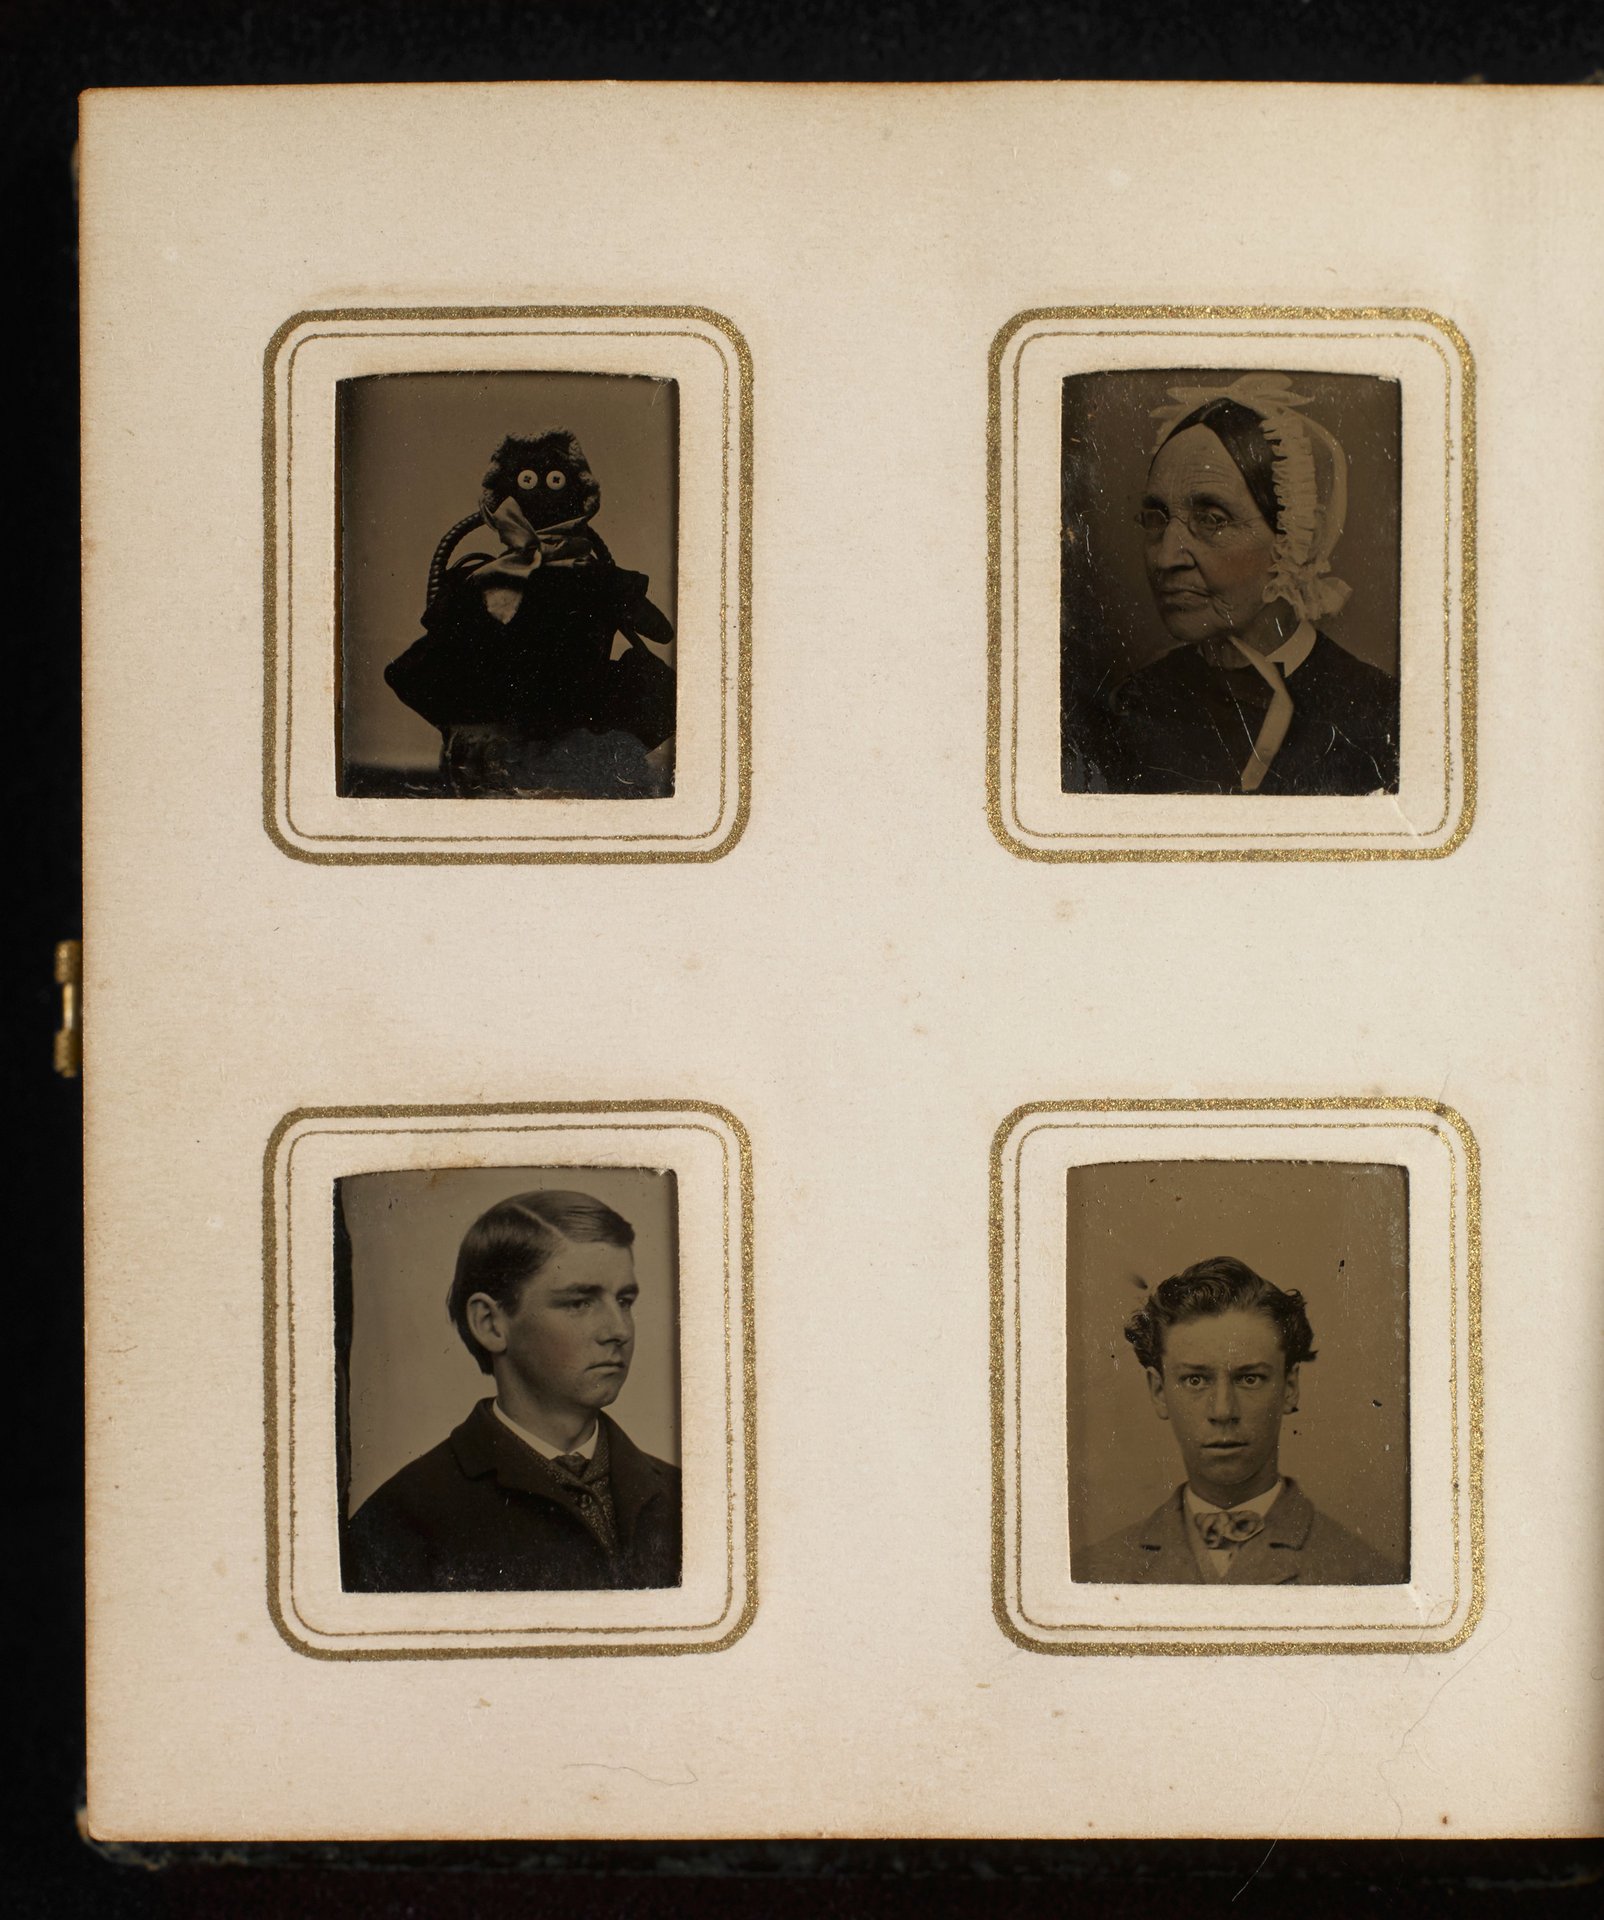 Unidentified photographer, Tintype from album, possibly Boston, ca. 1860–65